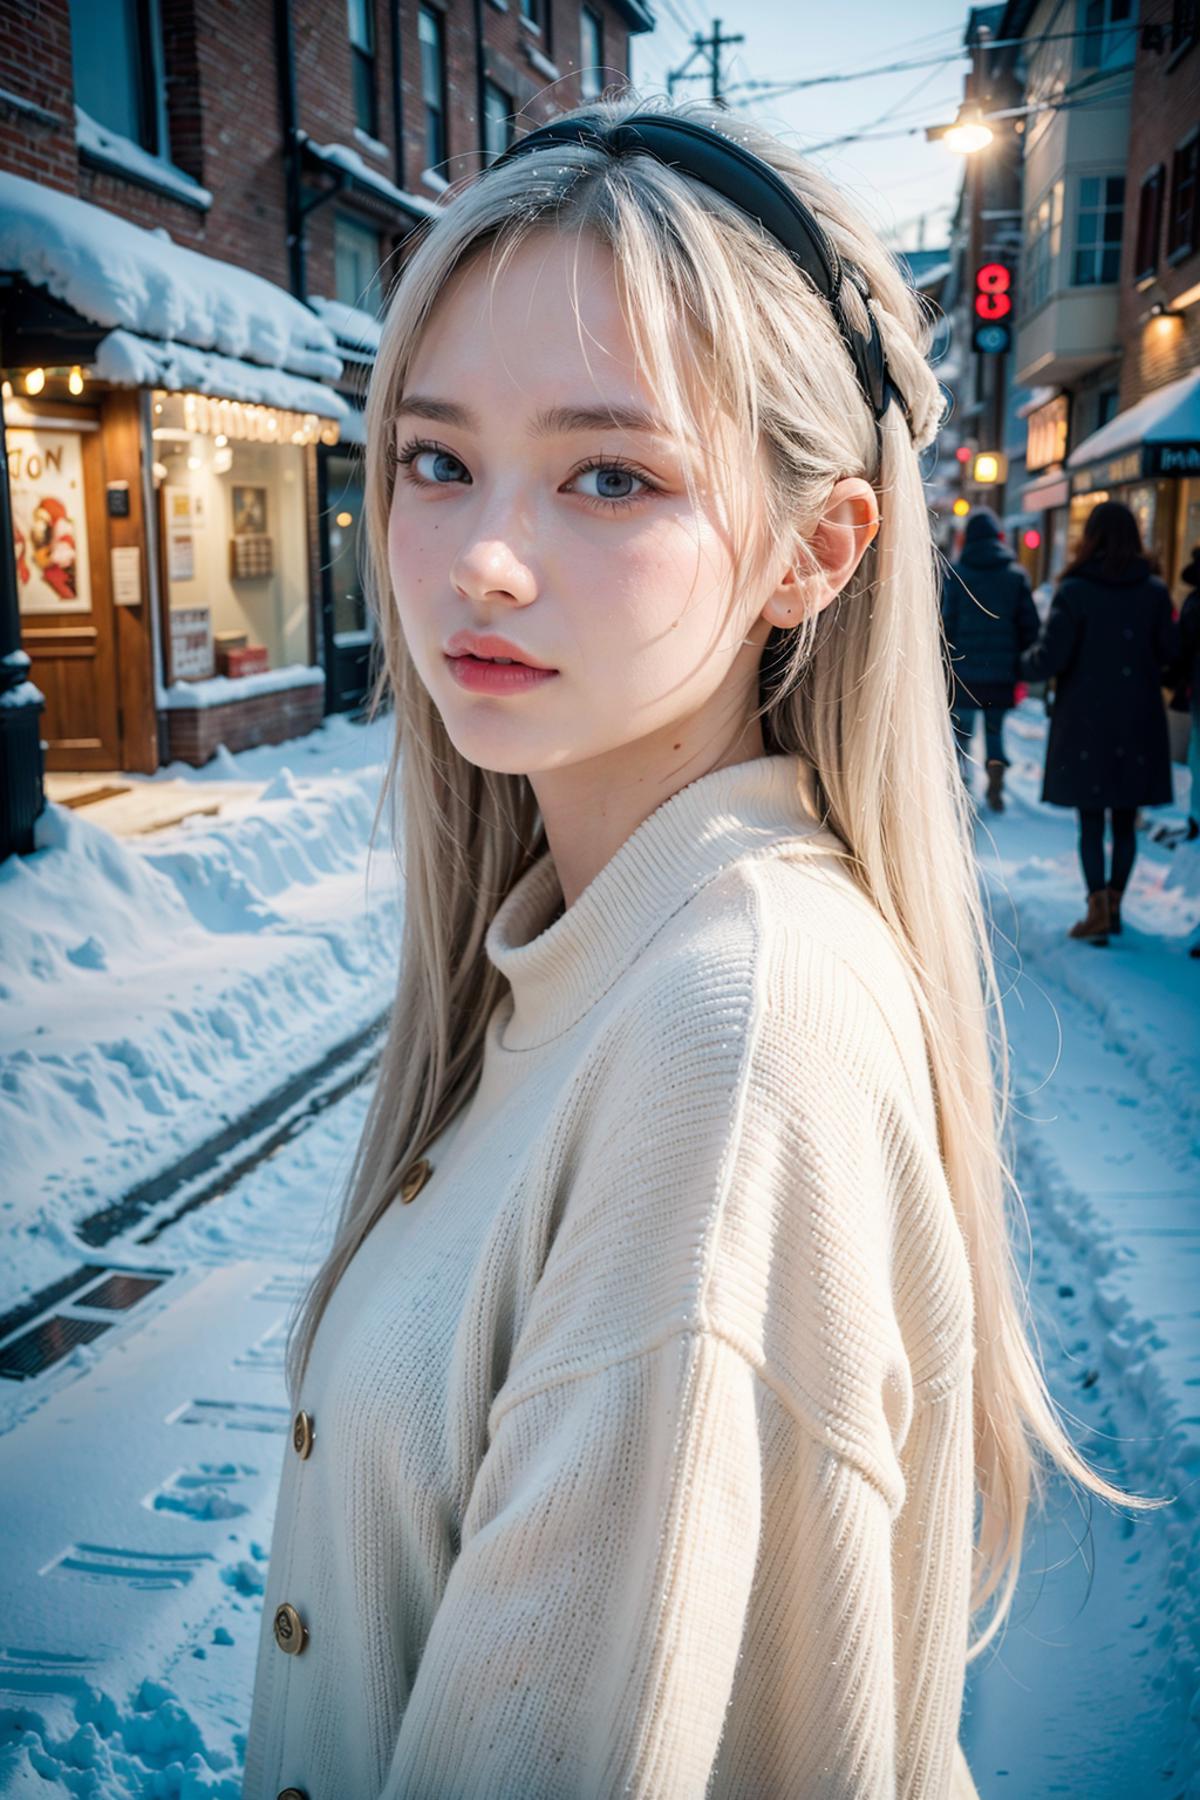 Blonde Woman with a Black Headband in Winter Snow.